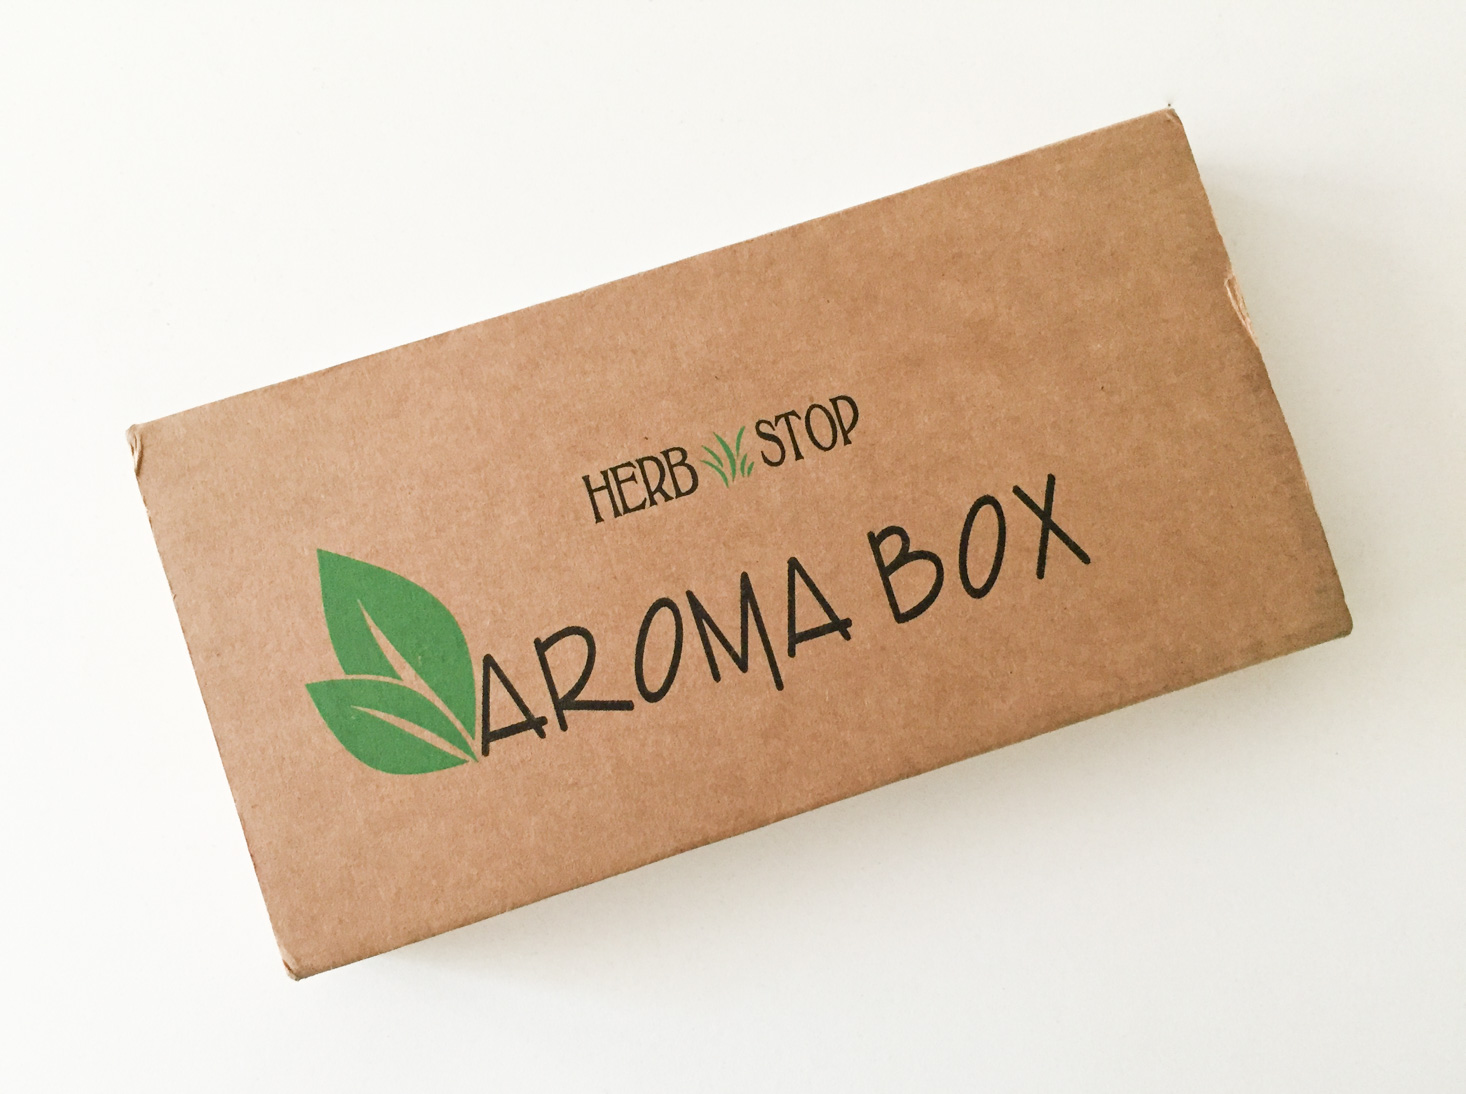 AromaBox Essential Oil Box Review + Coupon – August 2017